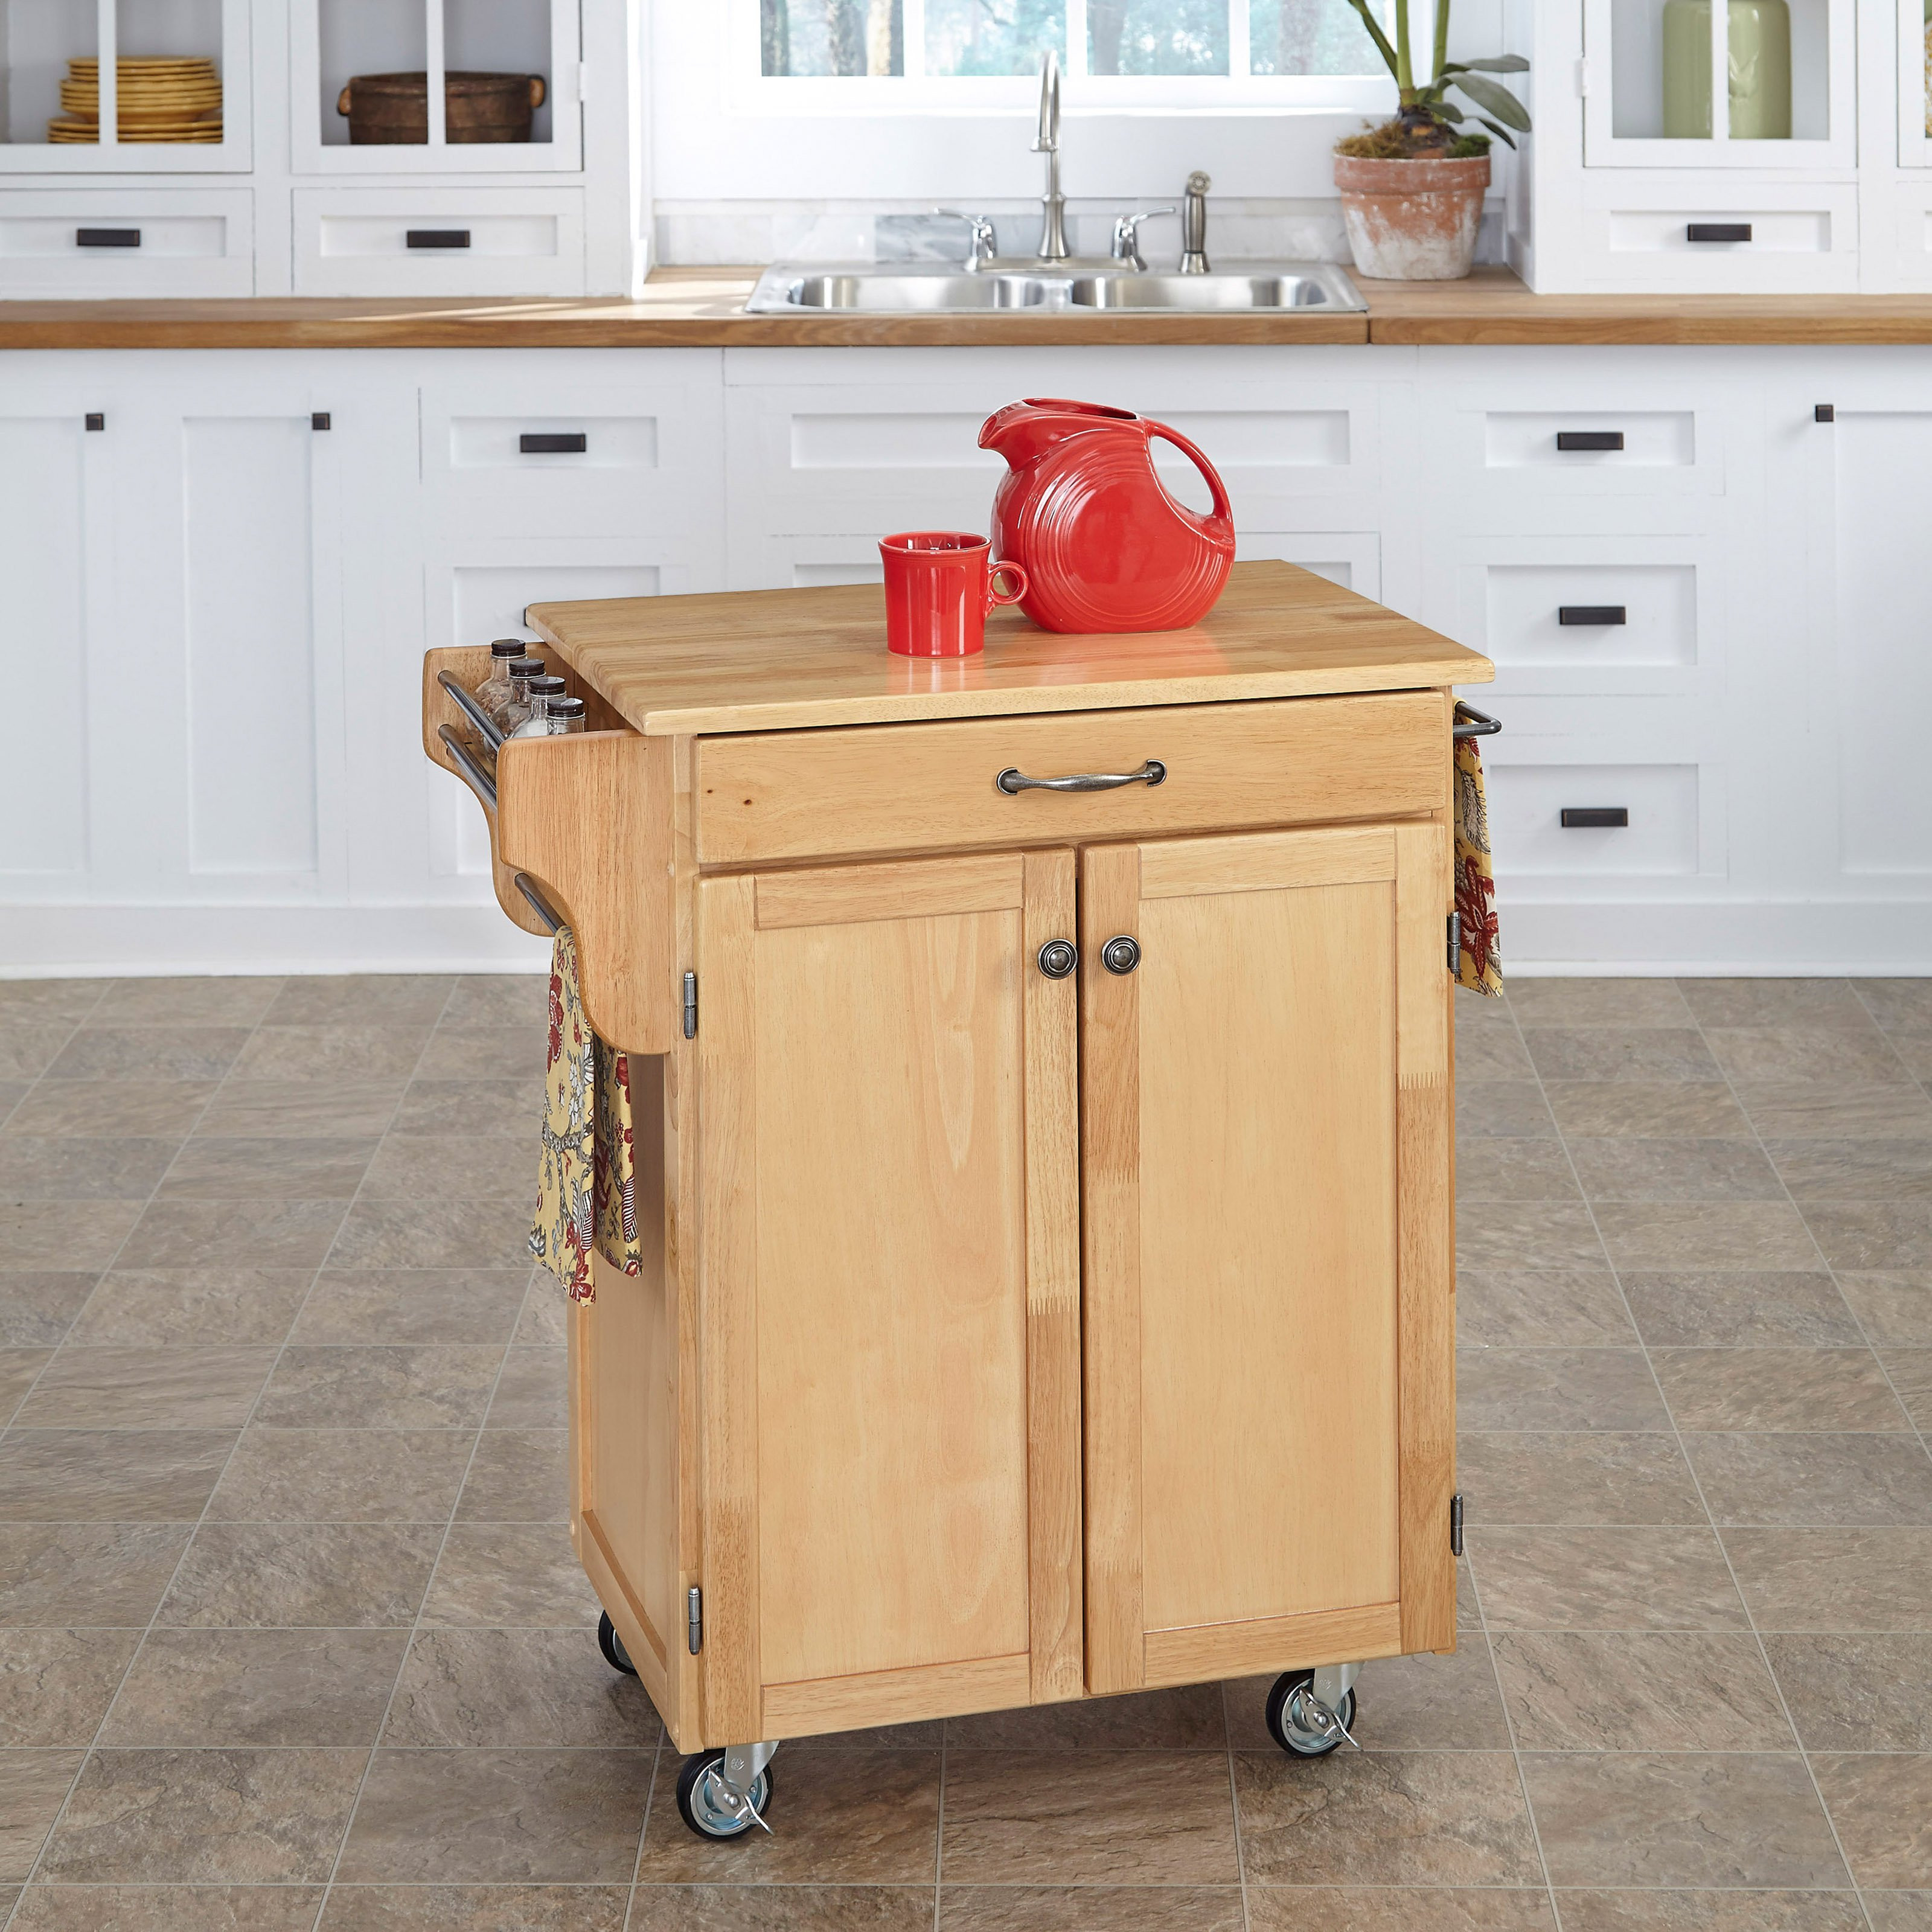 Small Kitchen Cart
 Home Styles Design Your Own Small Kitchen Cart Kitchen